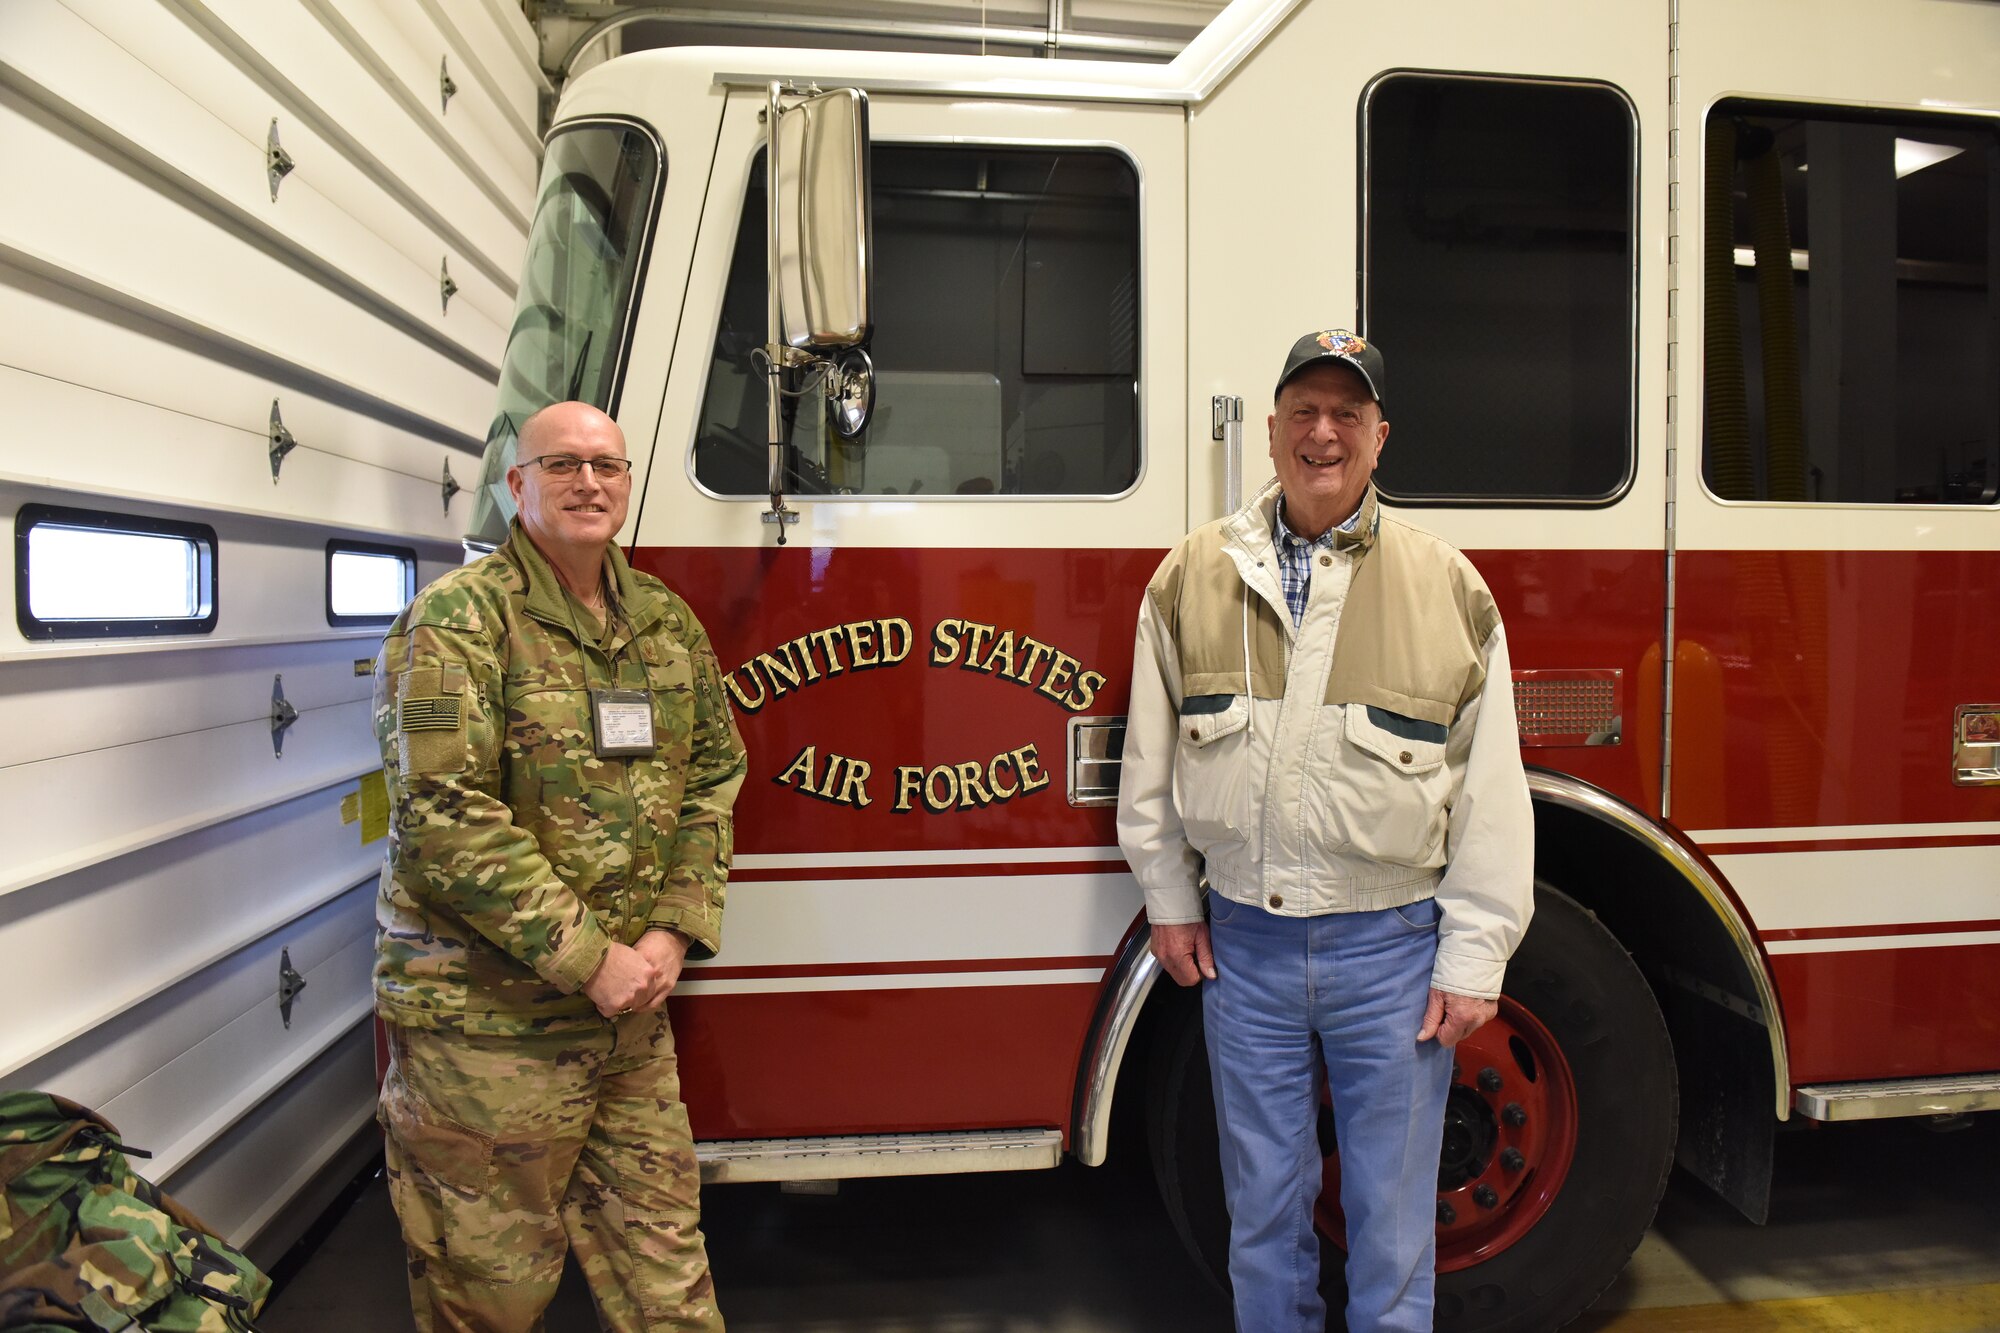 Master Sgt. Gary Shannon assigned to the 171st Air Refueling Wing near Pittsburgh and Retired Chief Master Sgt. Edward “Buck” Boyd pose for a photo in front of a fire department vehicle, Jan. 15, 2019